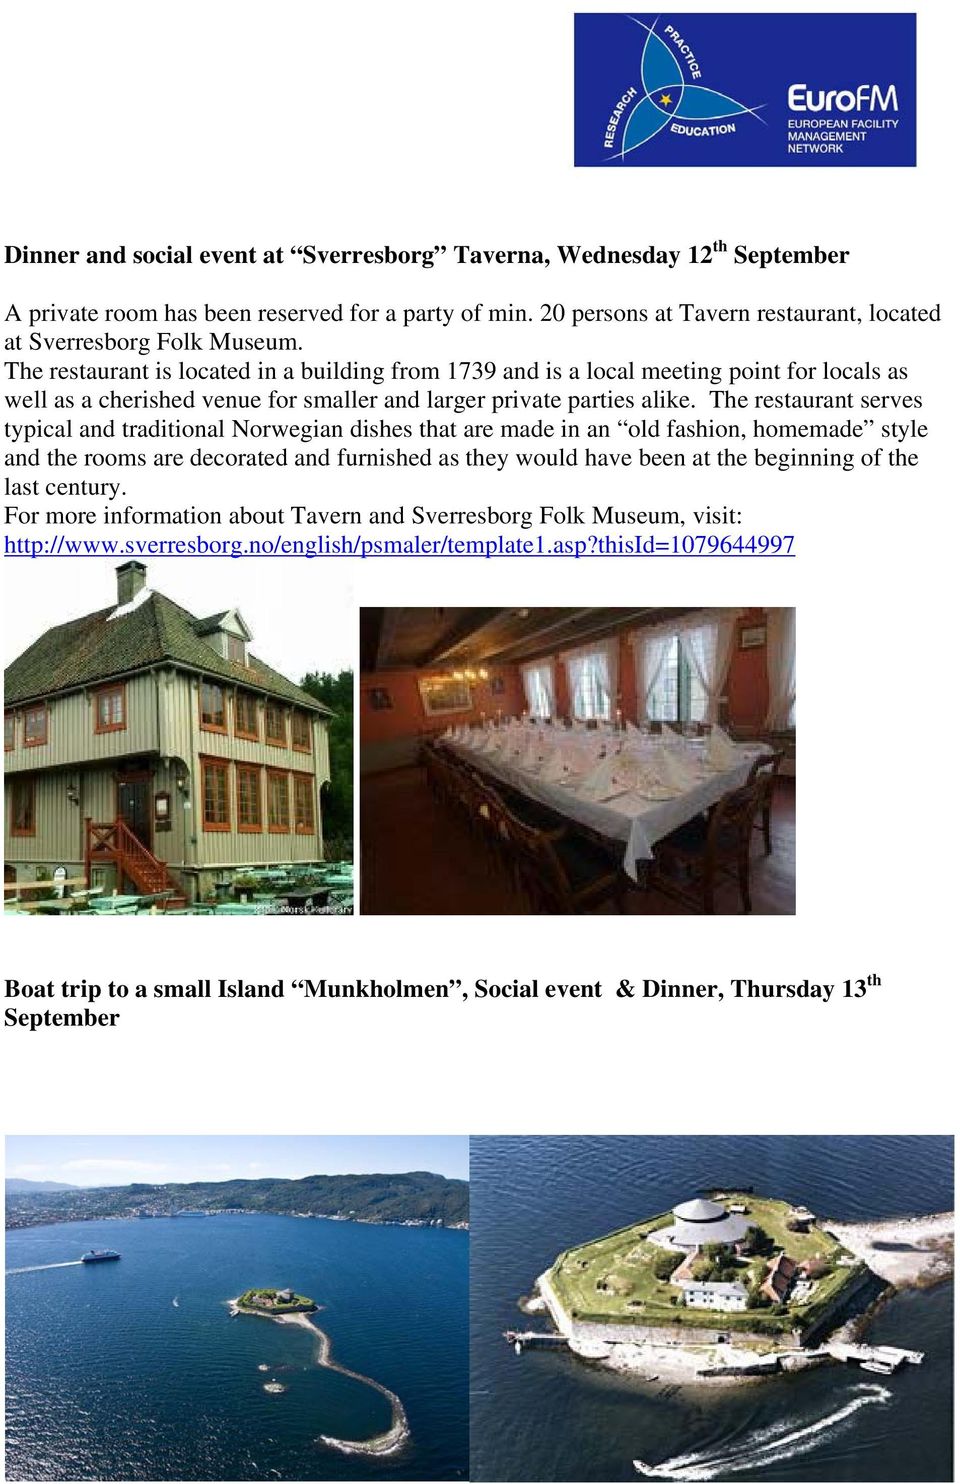 The restaurant serves typical and traditional Norwegian dishes that are made in an old fashion, homemade style and the rooms are decorated and furnished as they would have been at the beginning of